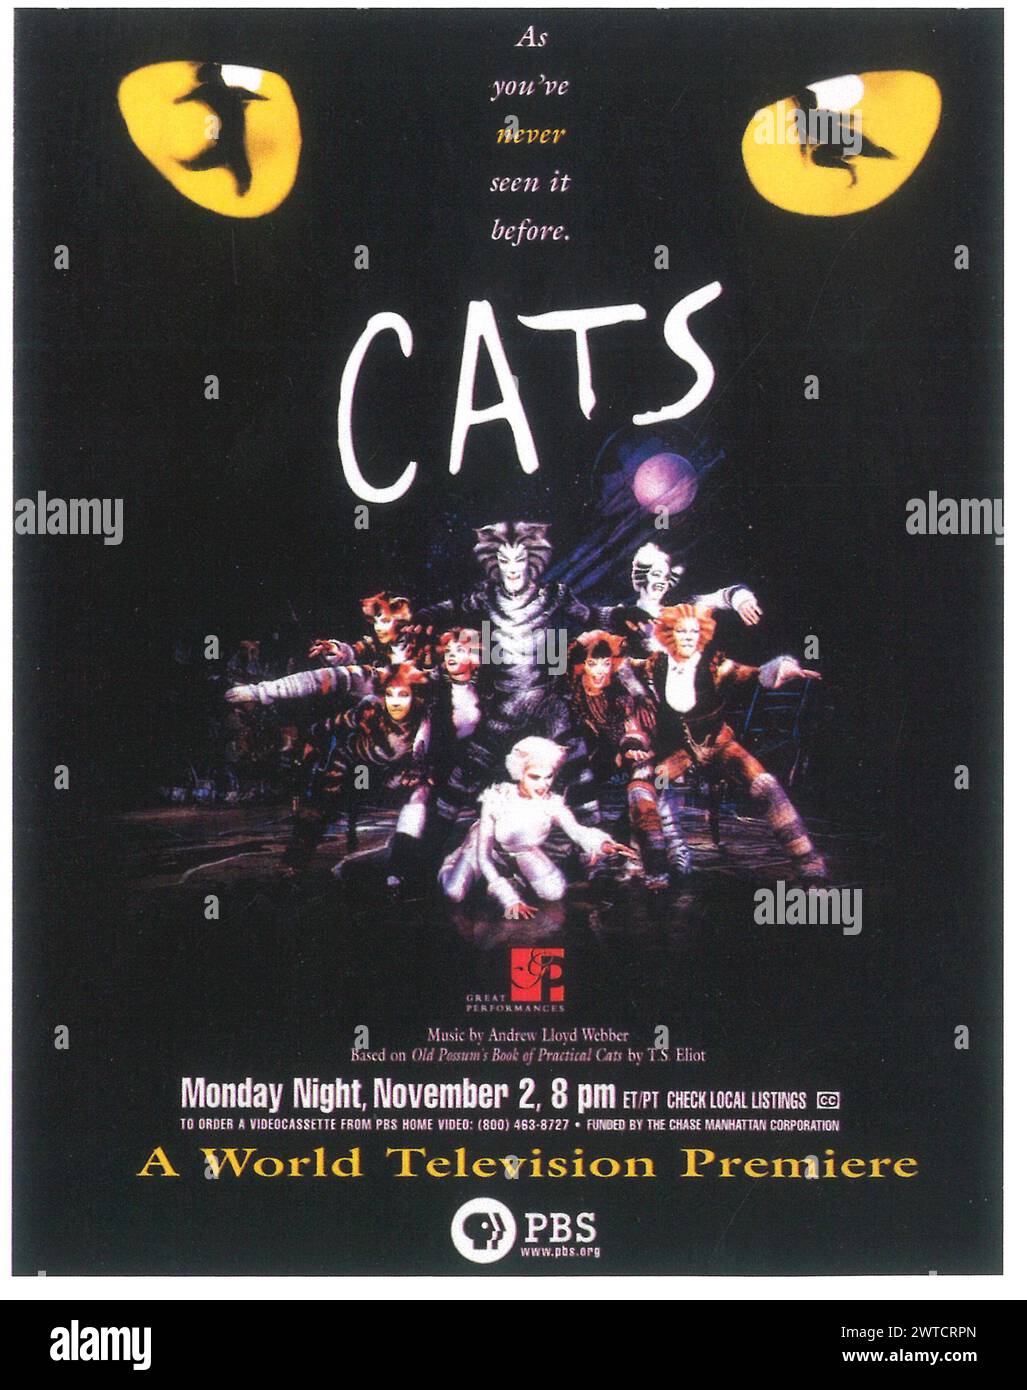 1998 Andrew Lloyd Webber – Cats Musical PBS World Television Premiere Posterwerbung Stockfoto